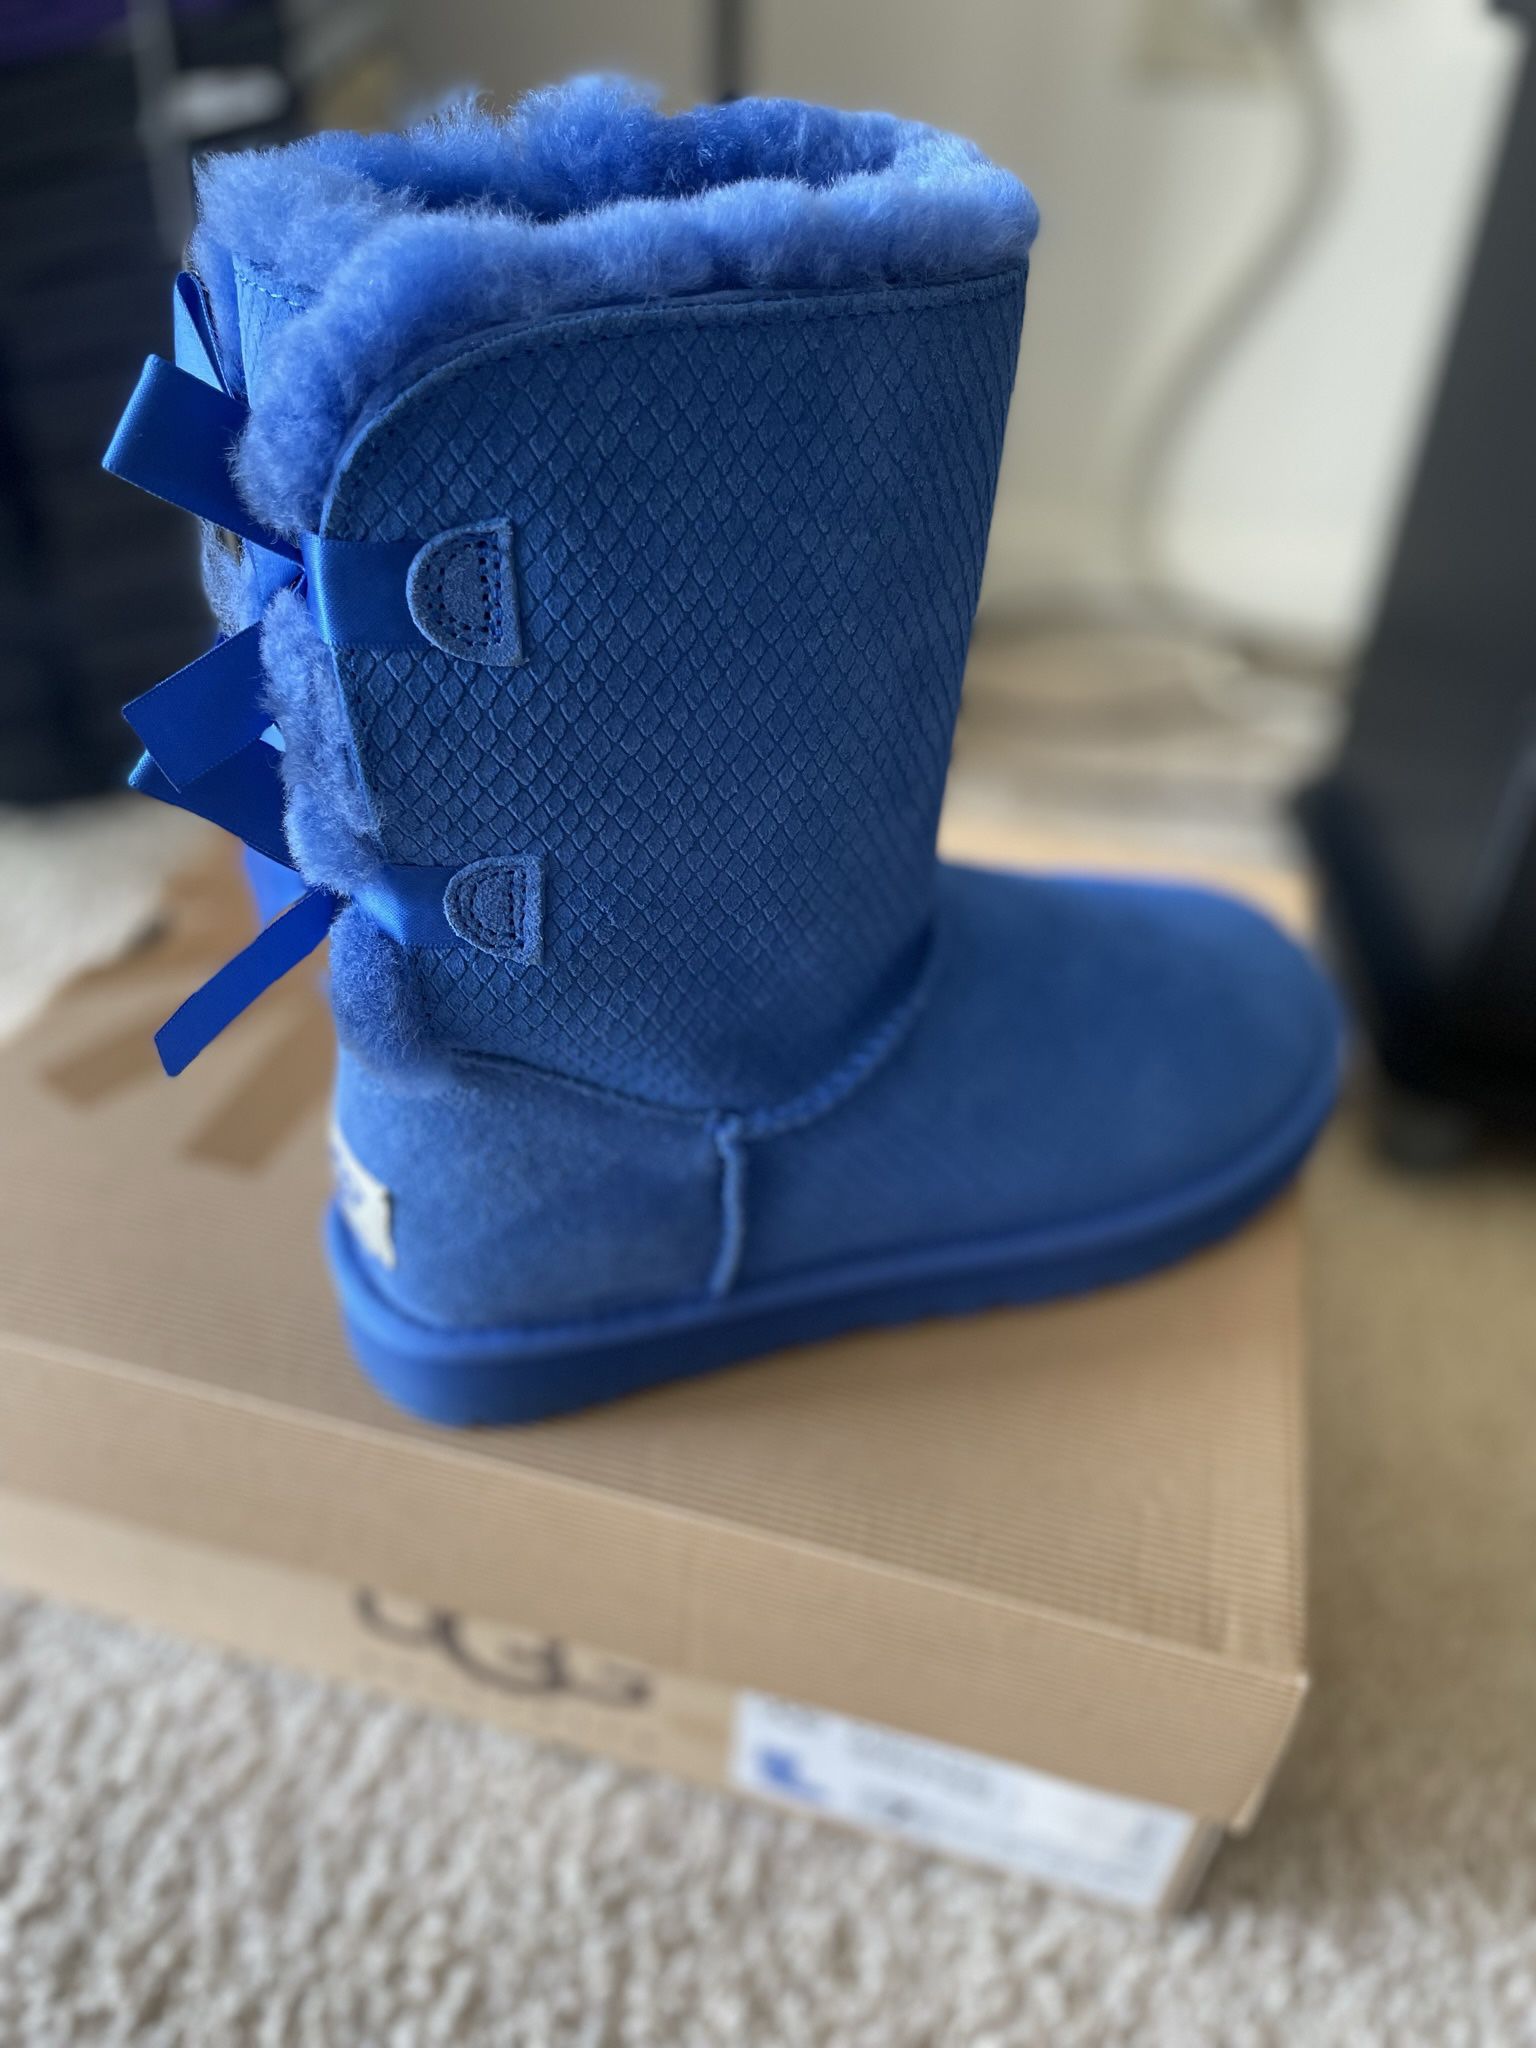 Ugg Boots (size 7)